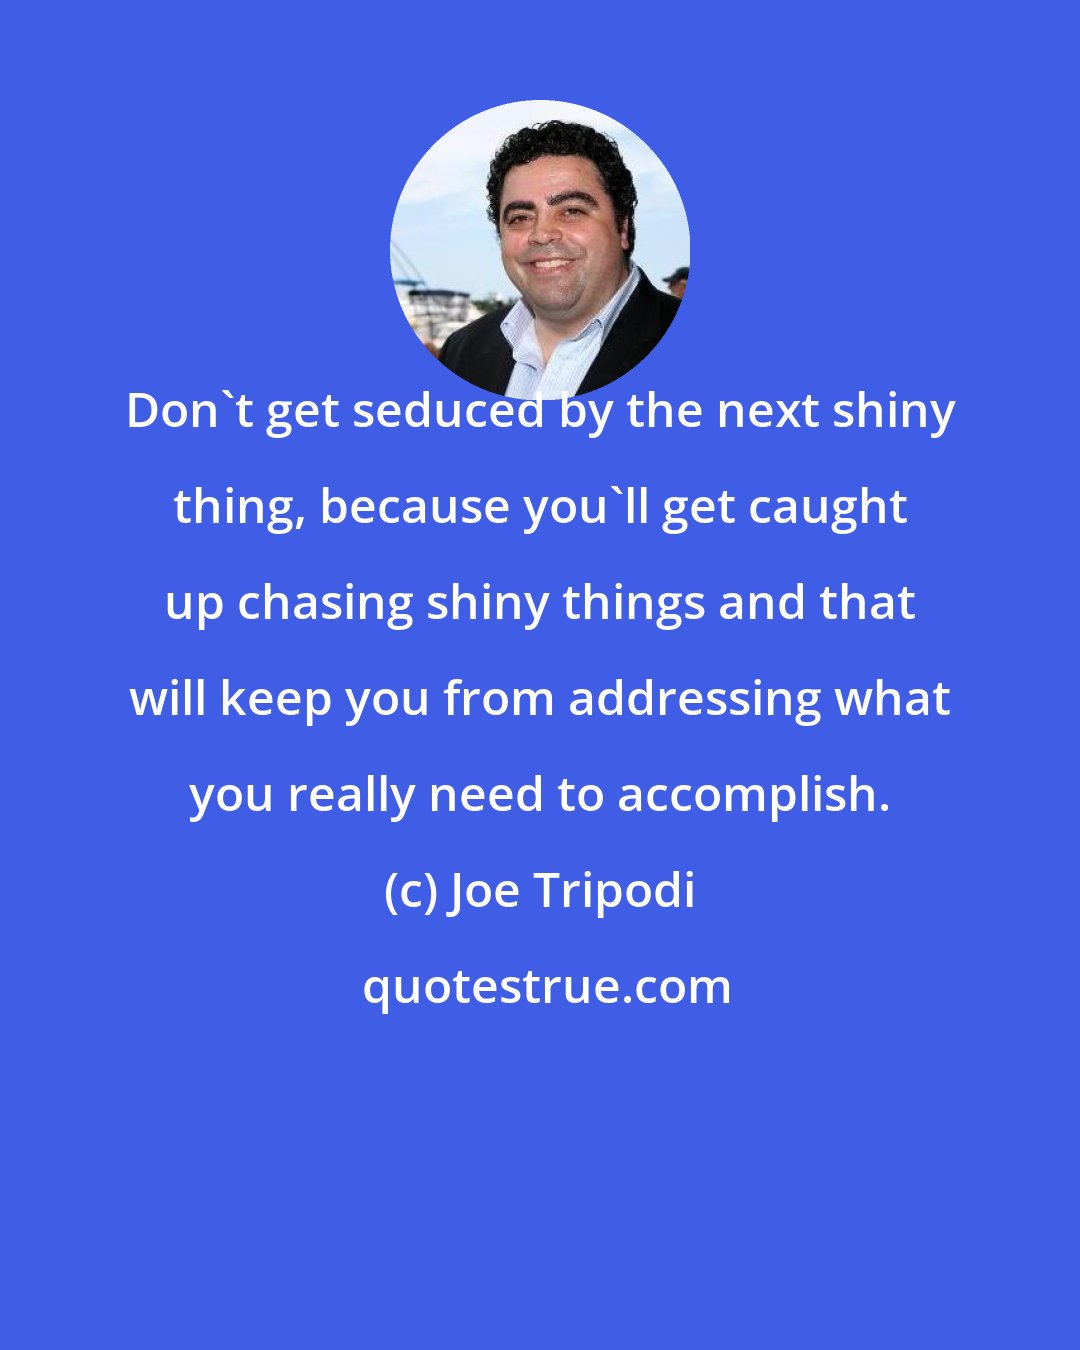 Joe Tripodi: Don't get seduced by the next shiny thing, because you'll get caught up chasing shiny things and that will keep you from addressing what you really need to accomplish.